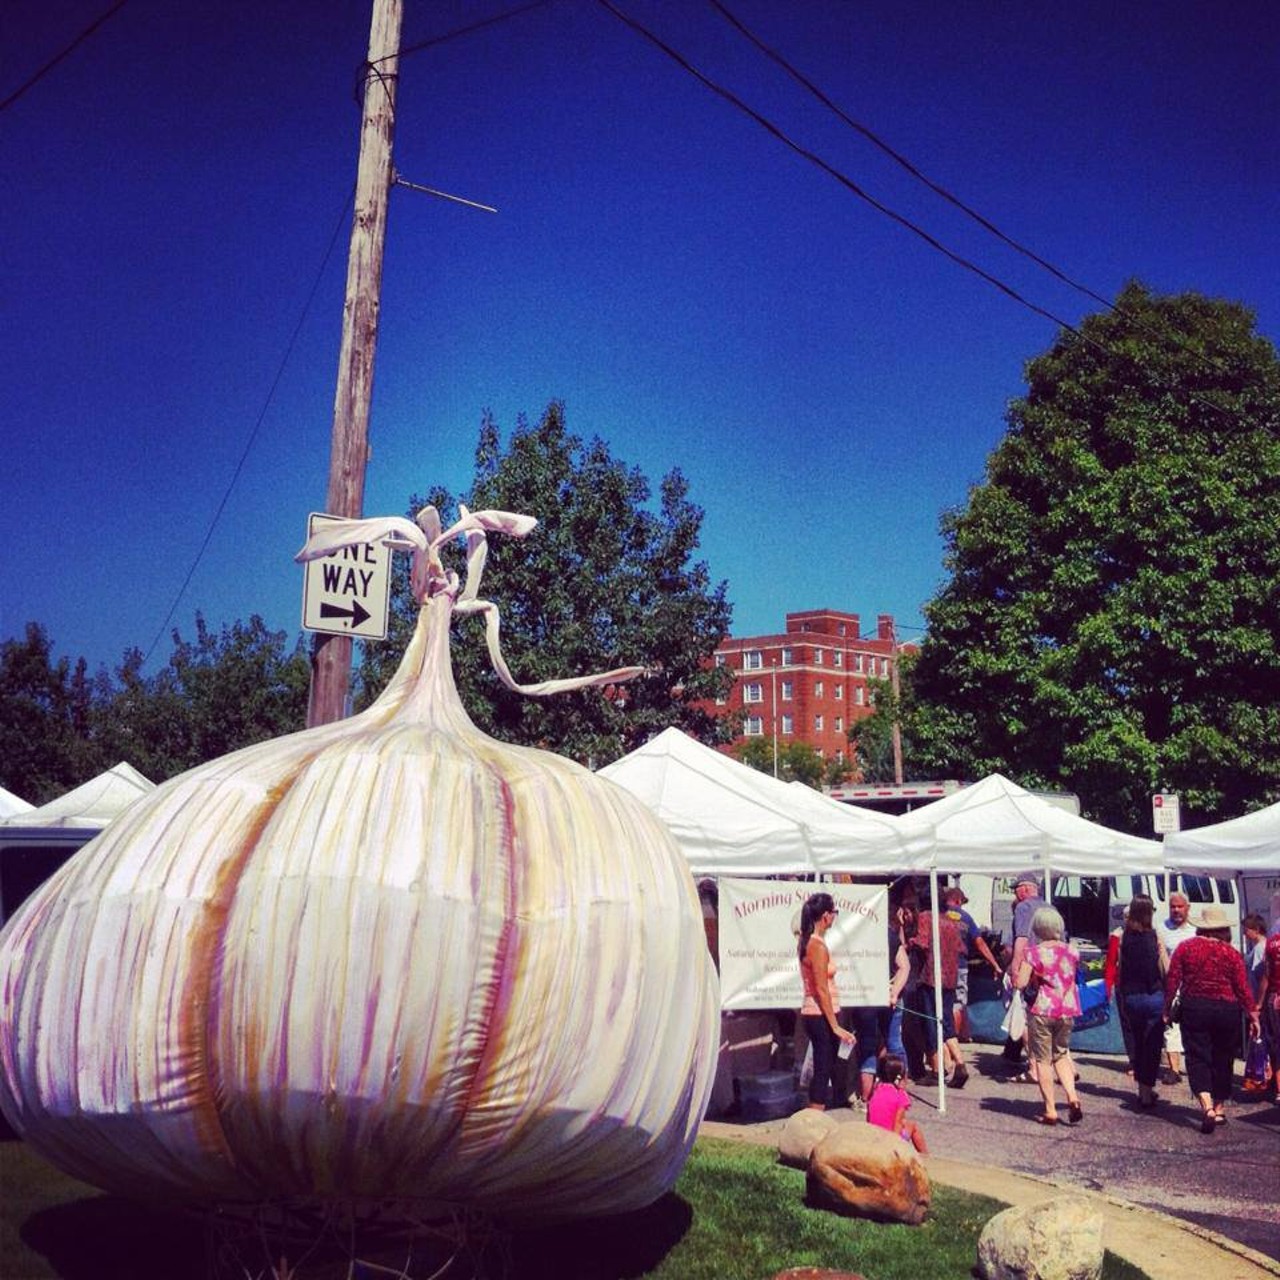 The 5th Annual Cleveland Garlic Festival will be held today at Shaker Square from 1 p.m. until 9 p.m. and tomorrow from noon to 6 p.m. The North Union Farmers Market hosts the event, and proceeds will benefit the organization. Festival attendees will enjoy live music, a celebrity chef competition with free samplings, the Miss Garlic competition, a dedicated area for kids and multiple parades. Tickets are $8 for a single day adult pass and $12 for a two-day pass. Go to clevelandgarlicfestival.org for more info. (Jason Beudert)